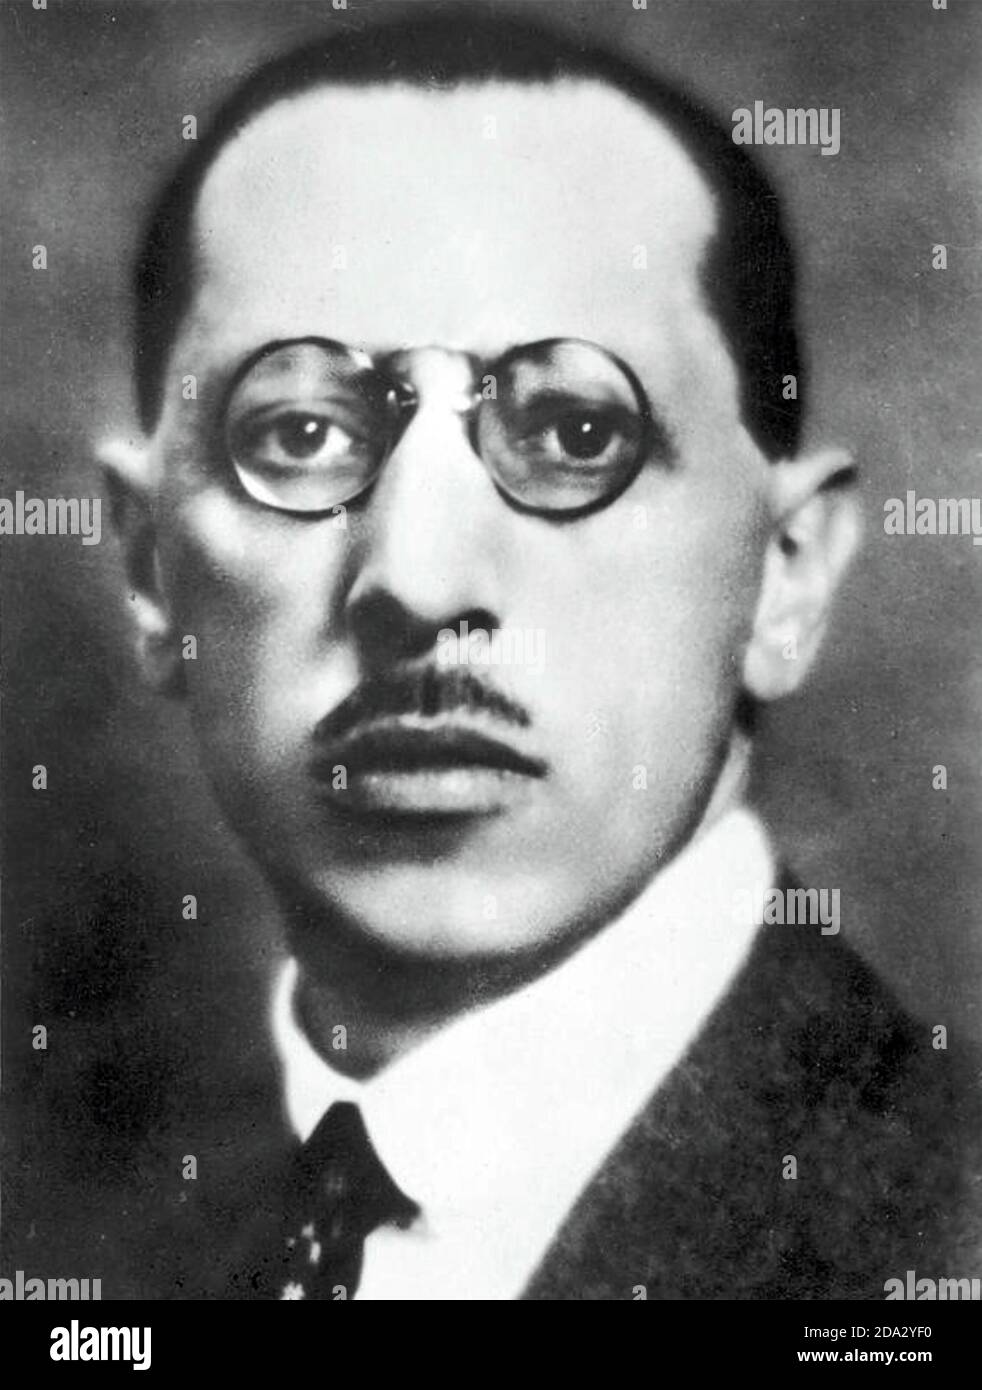 IGOR STRAVINSKY (1882-1971) Russian composer, pianist and conductor about 1905. Stock Photo